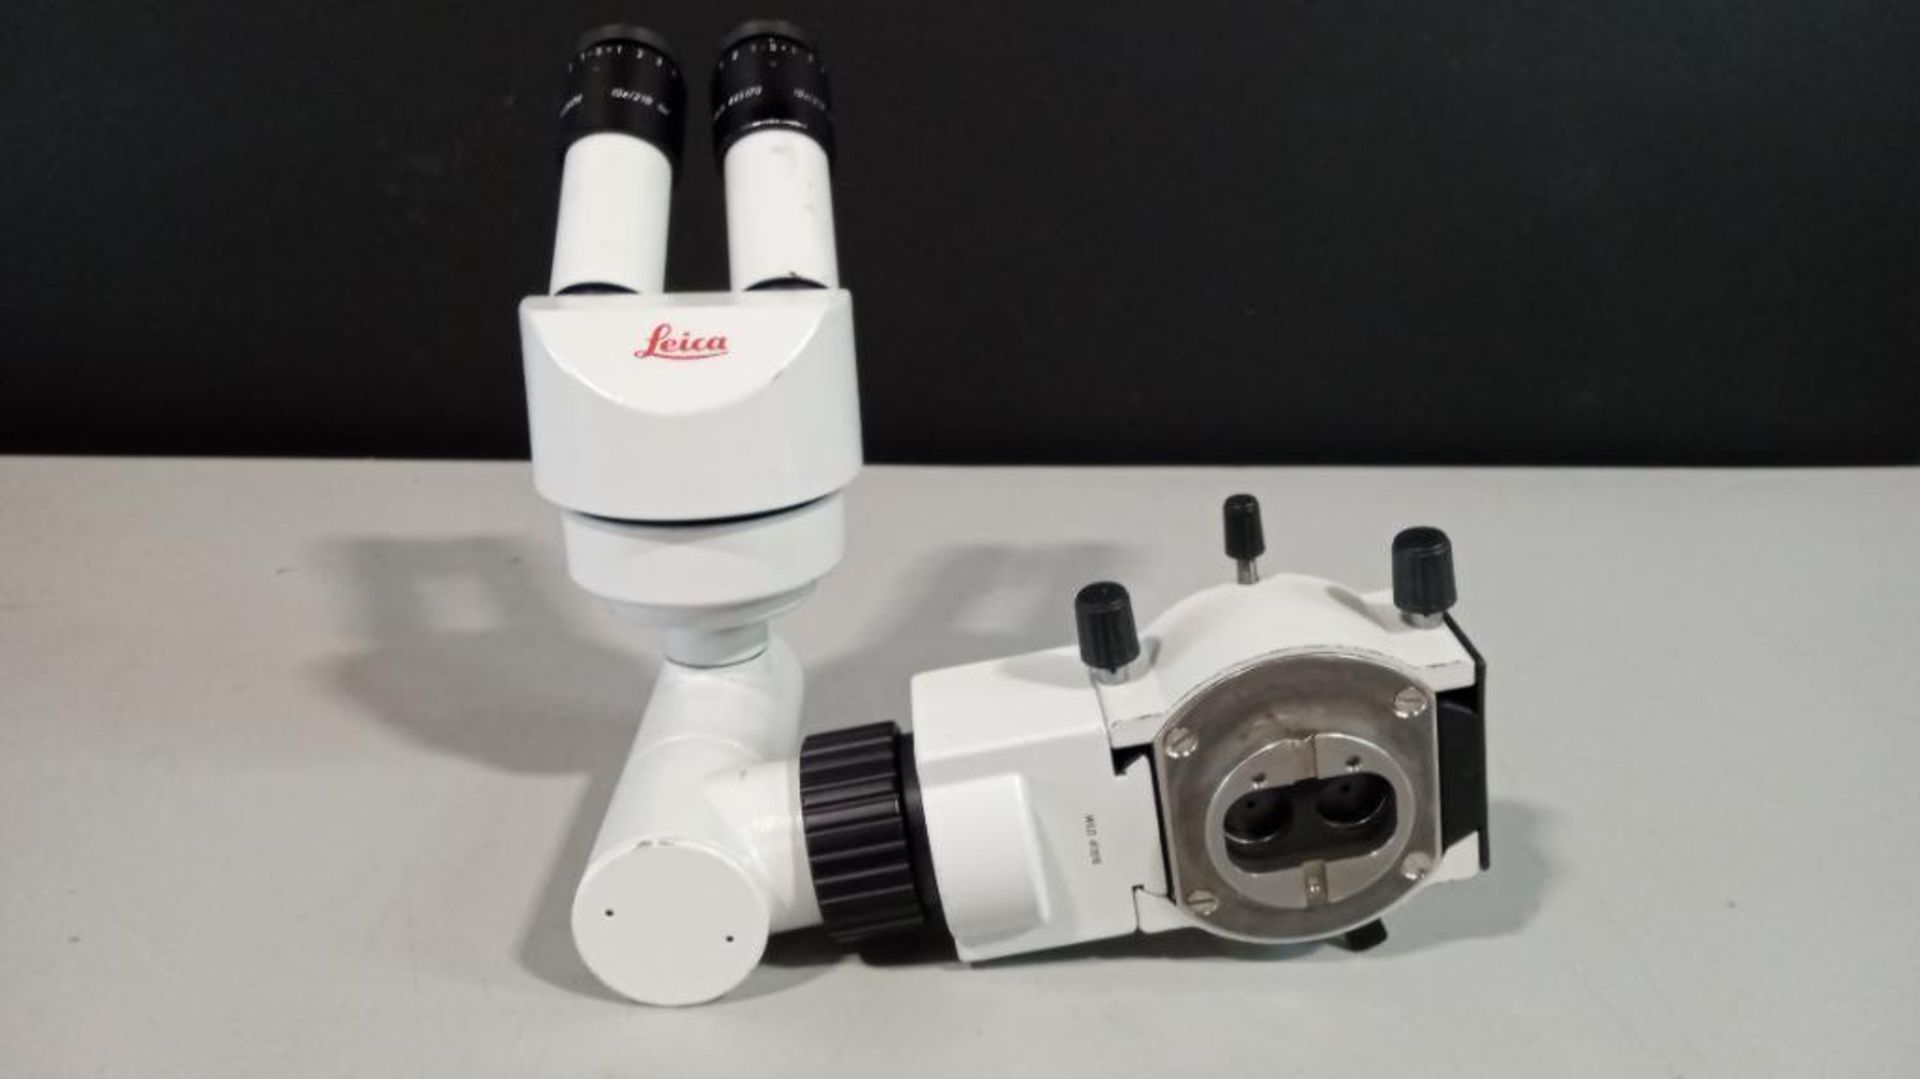 LEICA SURGICAL MICROSCOPE BINOCULAR WITH EYEPIECES BOTH ARE (10X/21B) - Image 2 of 3